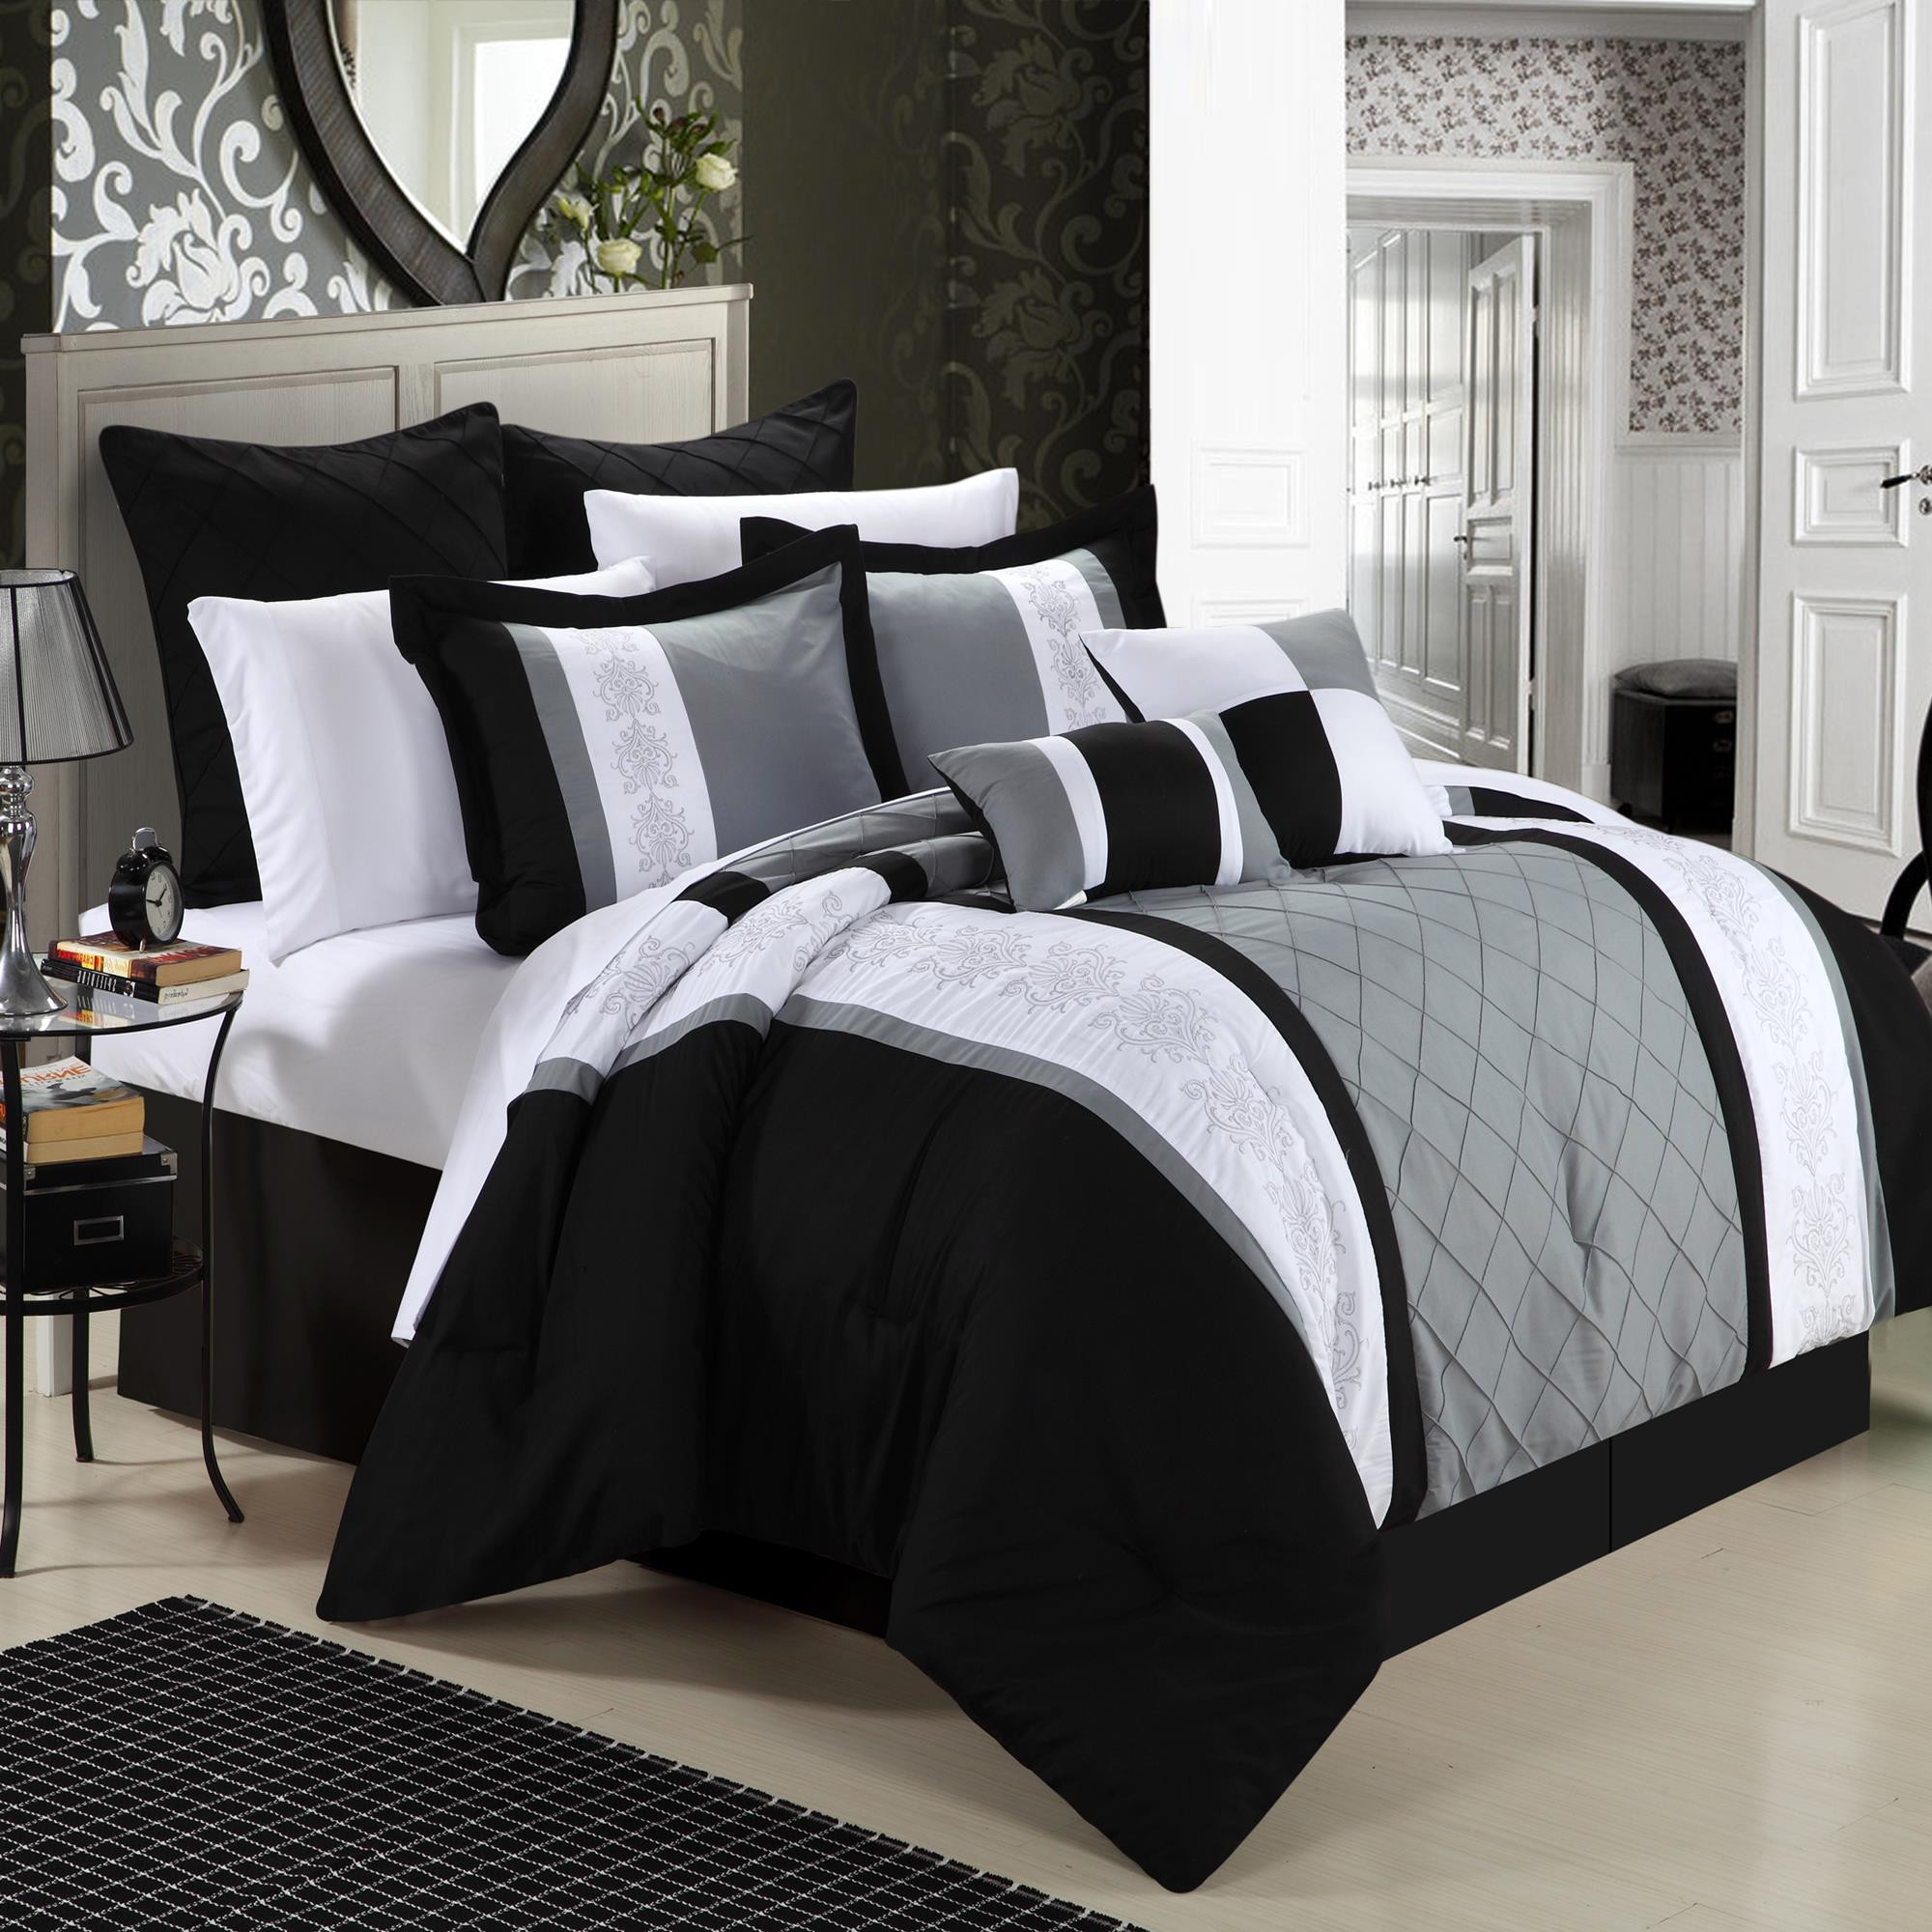 Chic Home Livingston Black Comforter Bed In A Bag Set 8 piece - Queen